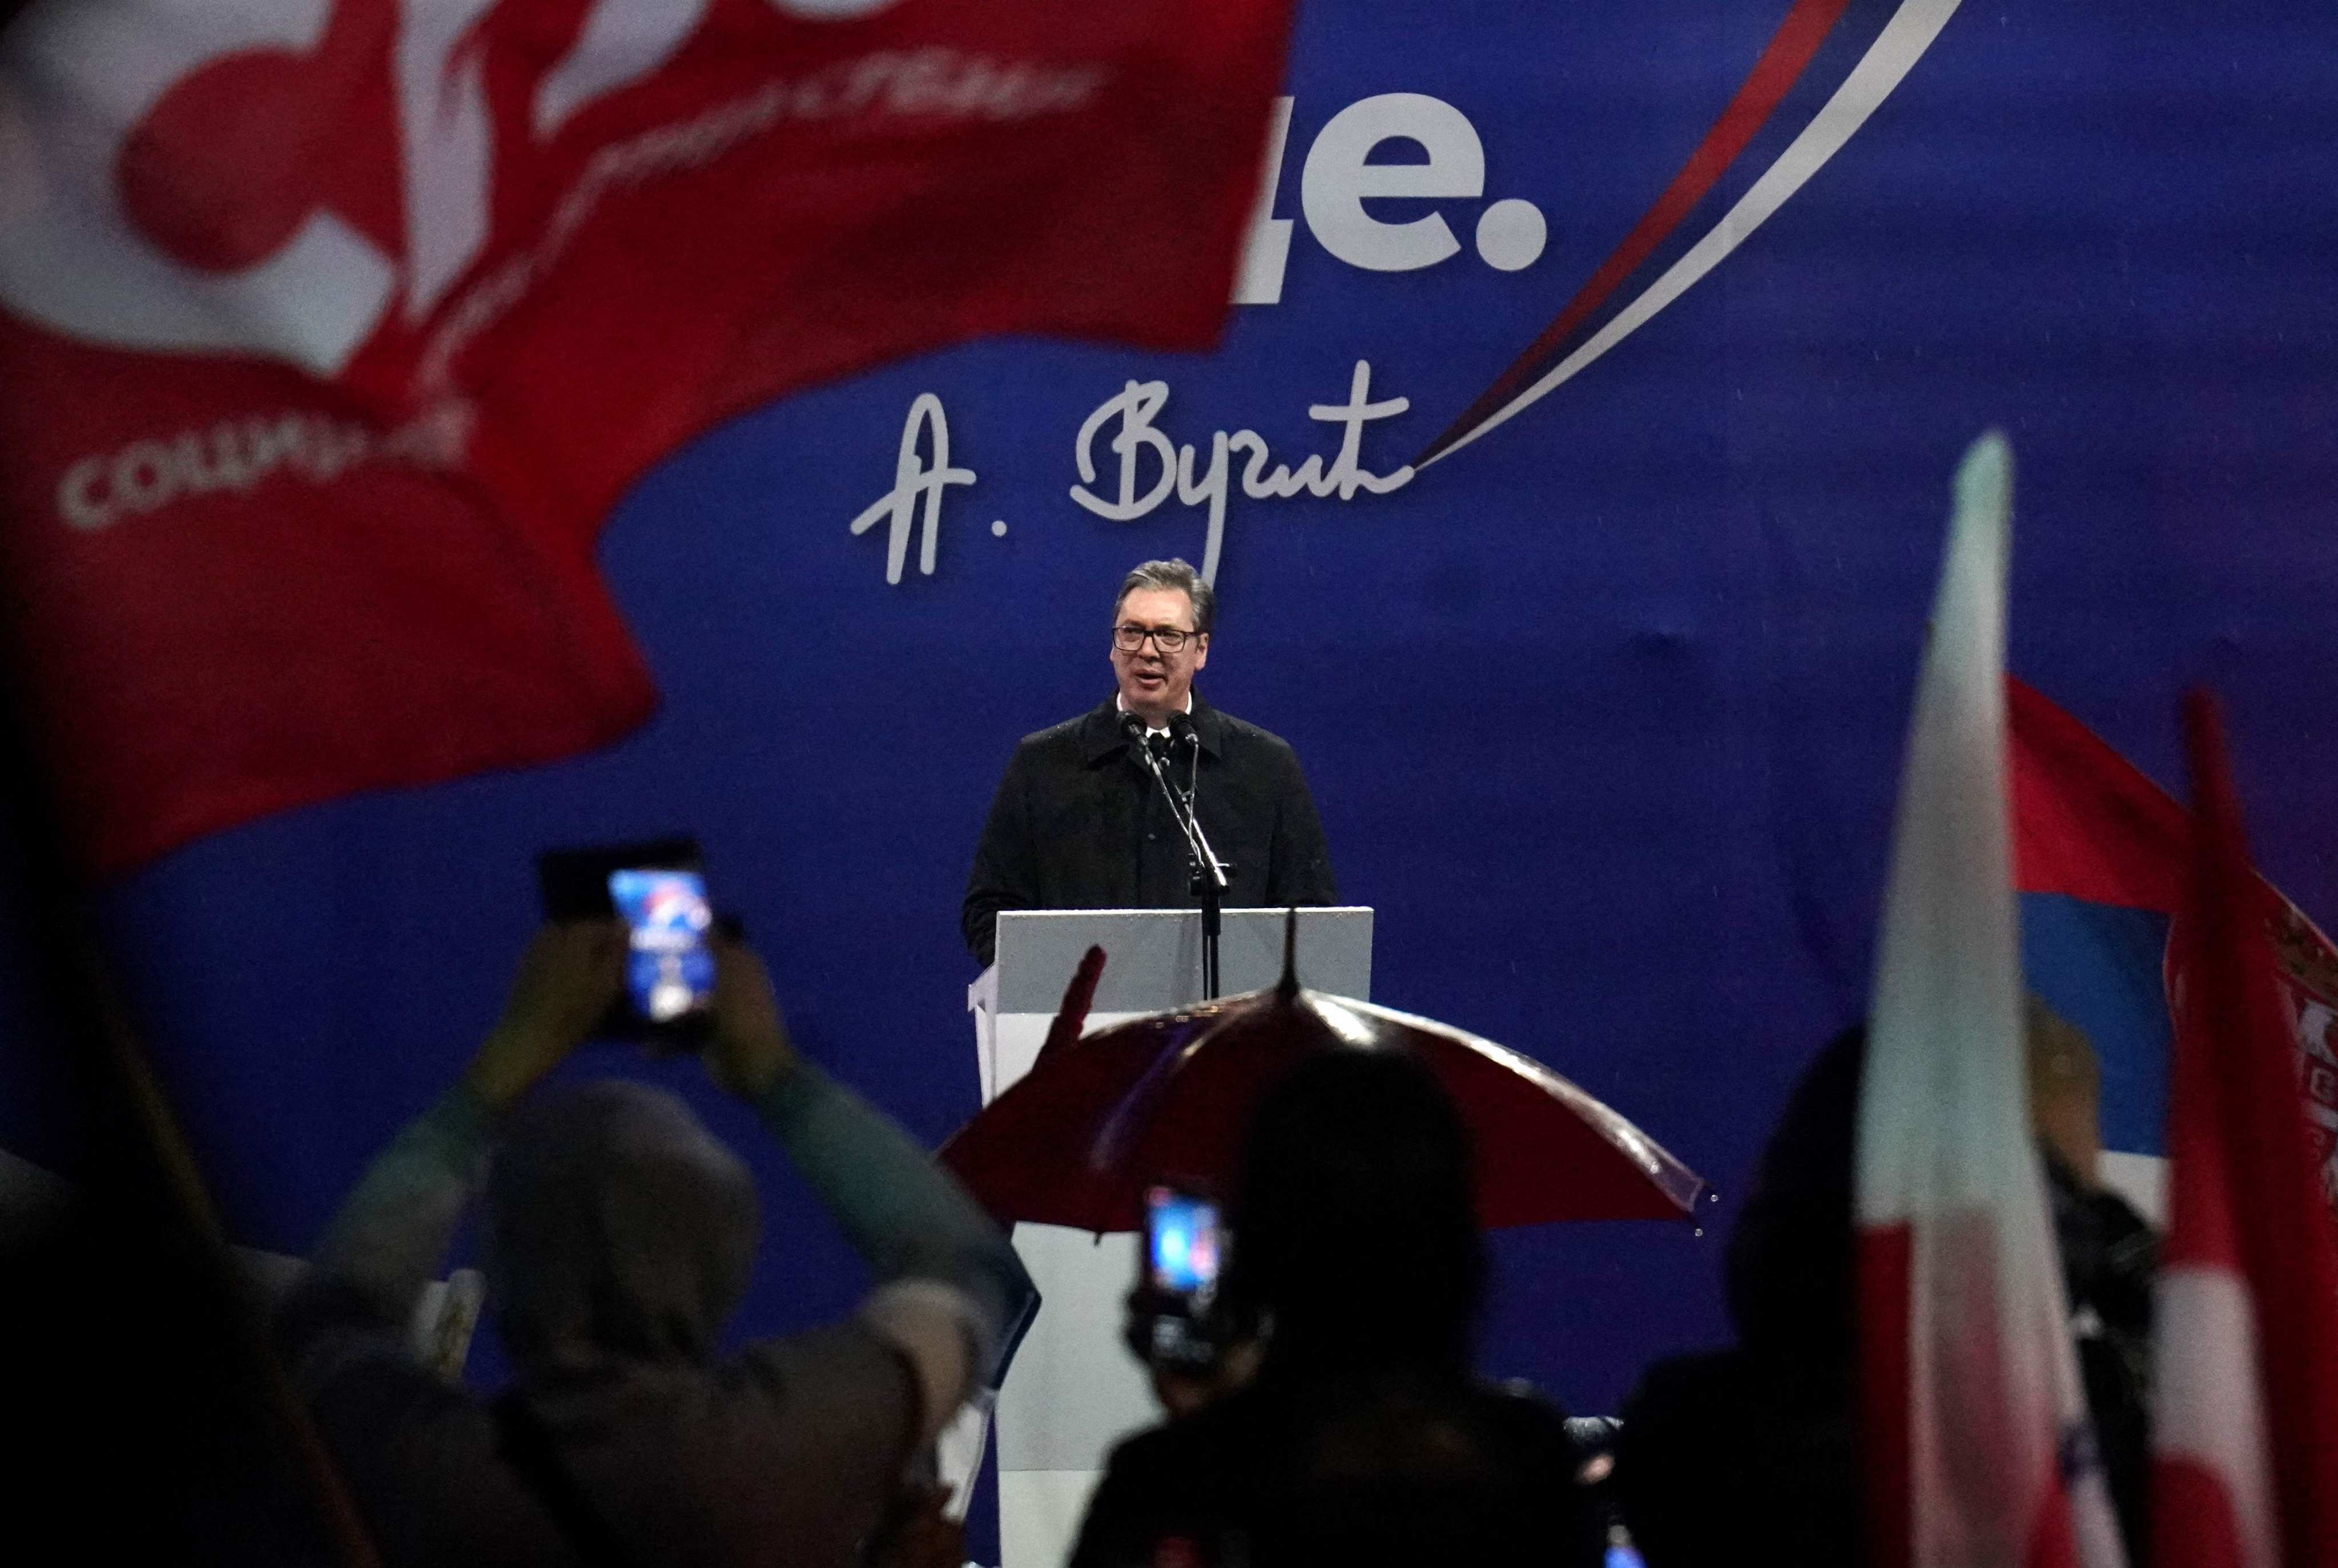 Serbia’s President Aleksandar Vucic during a pro-government rally in Belgrade, Serbia on Friday. Photo: AFP